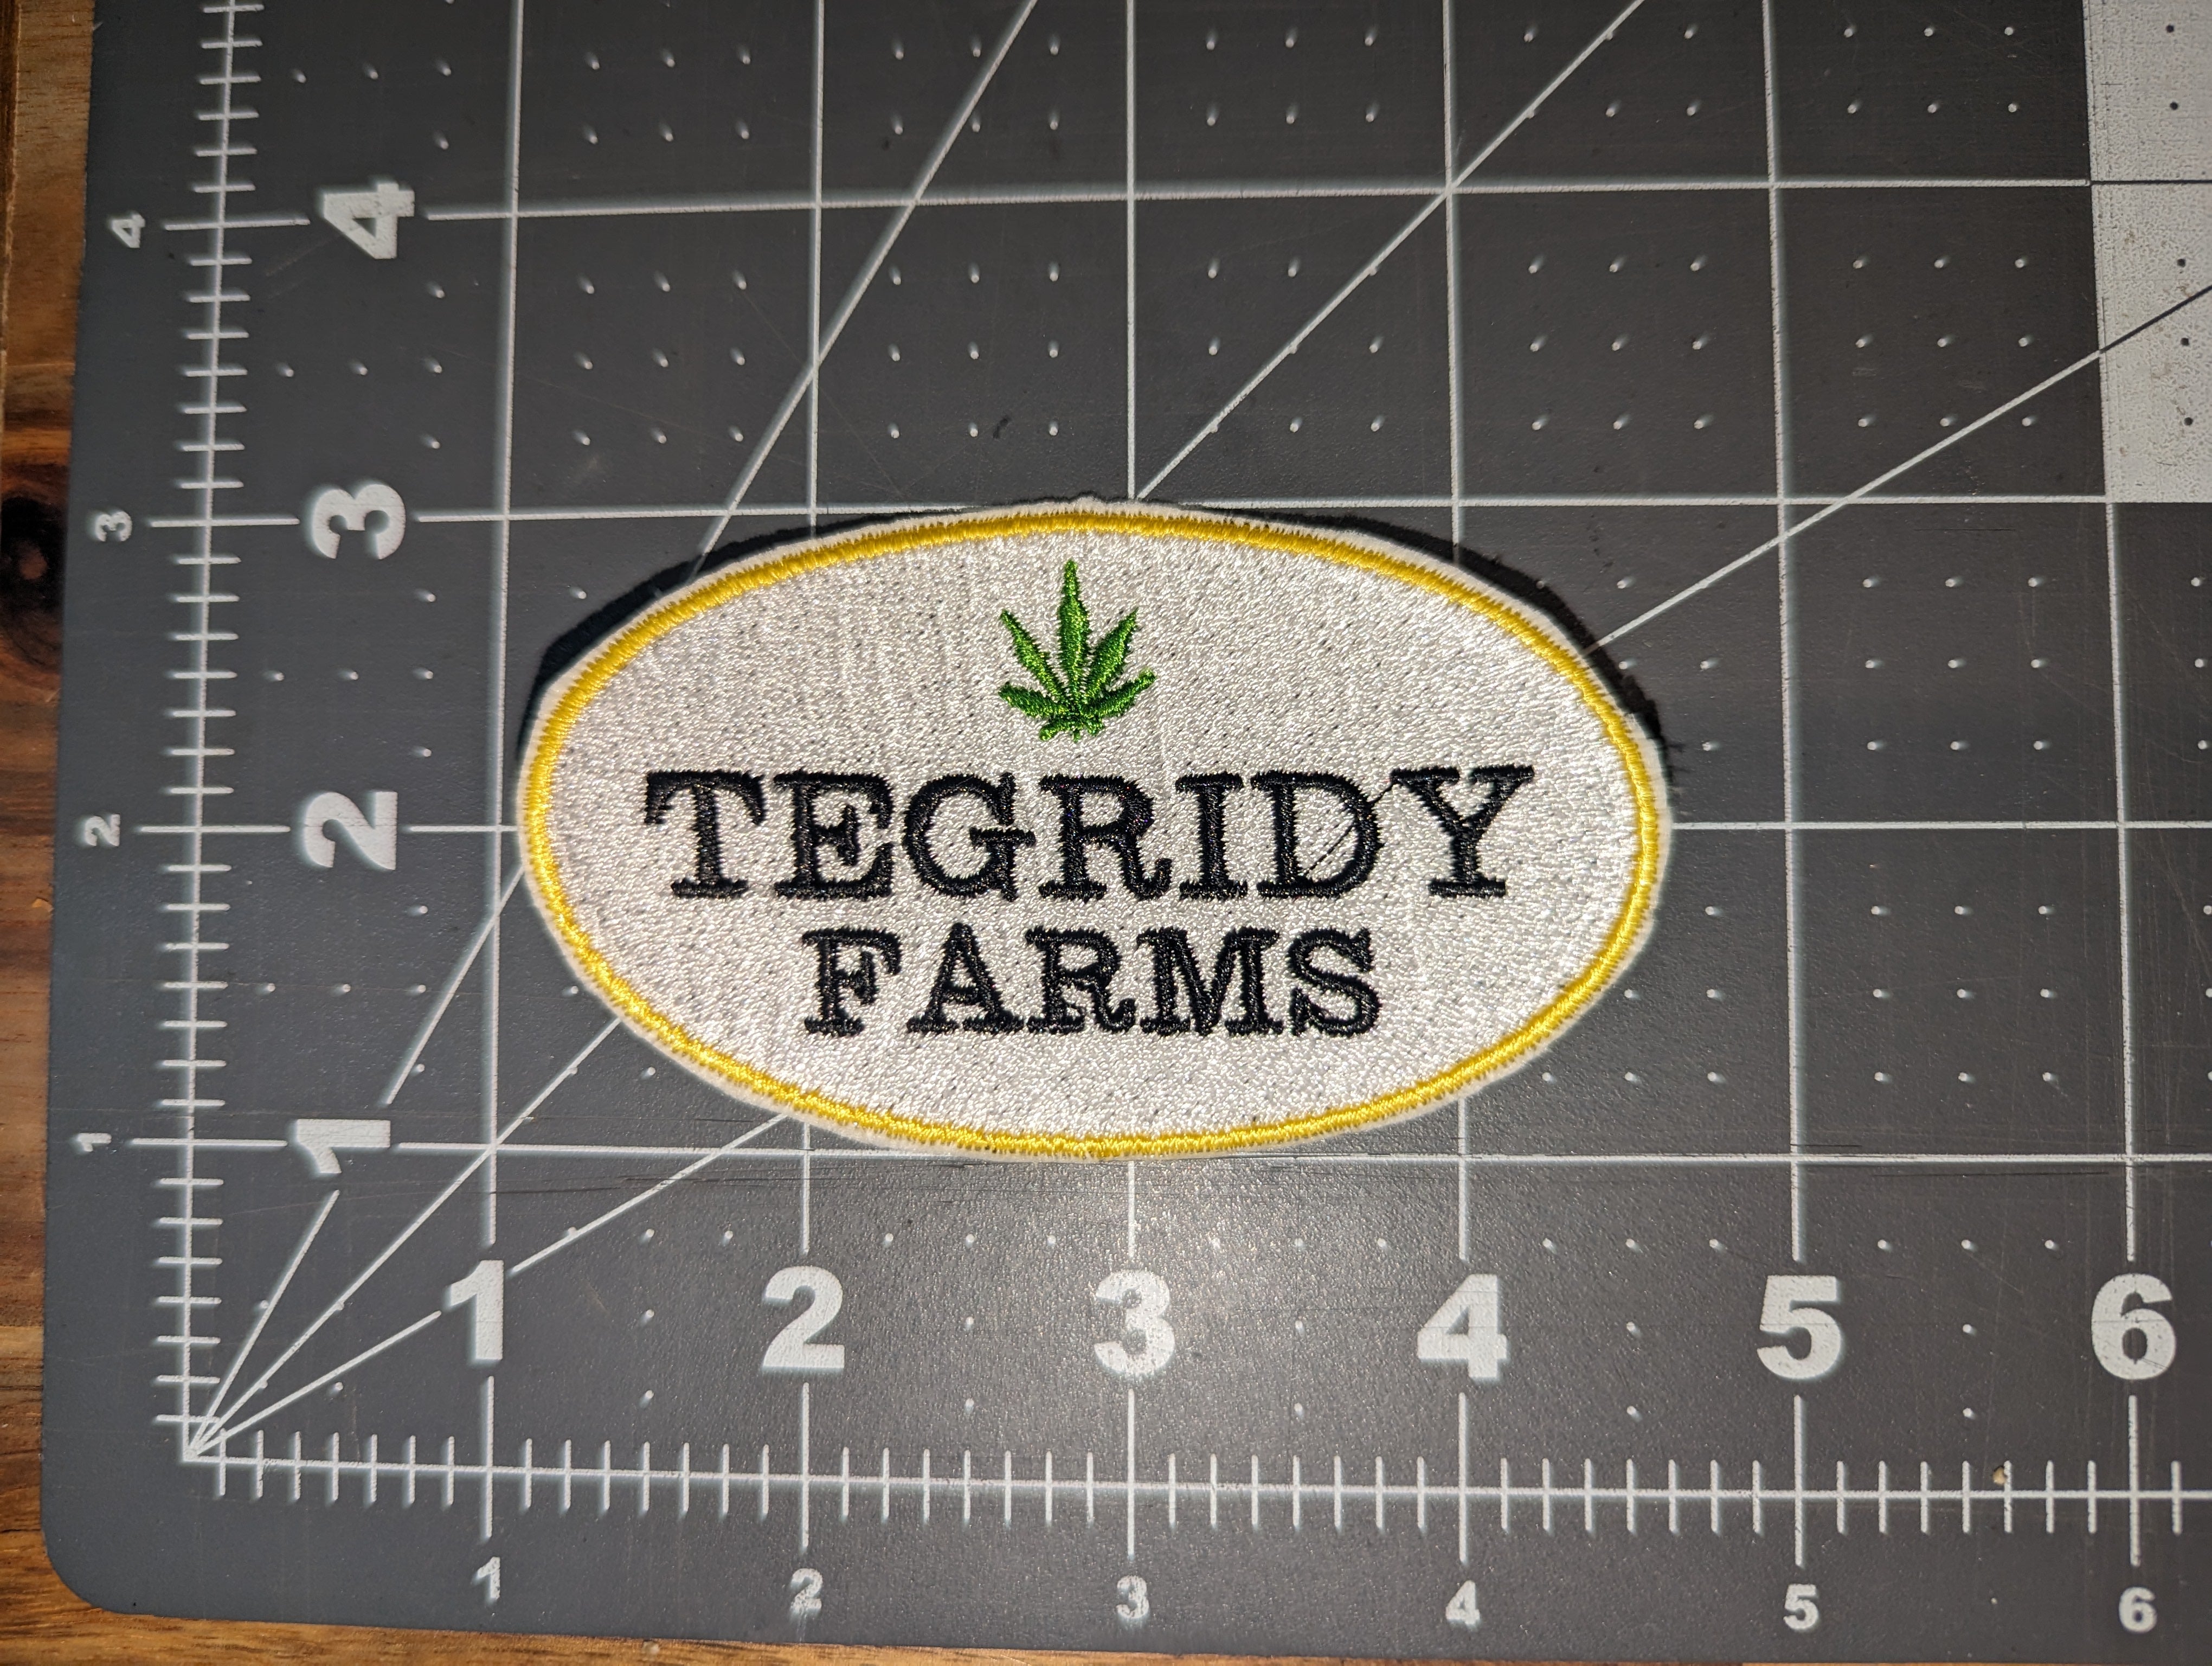 Tegridy Farms Iron On Patch